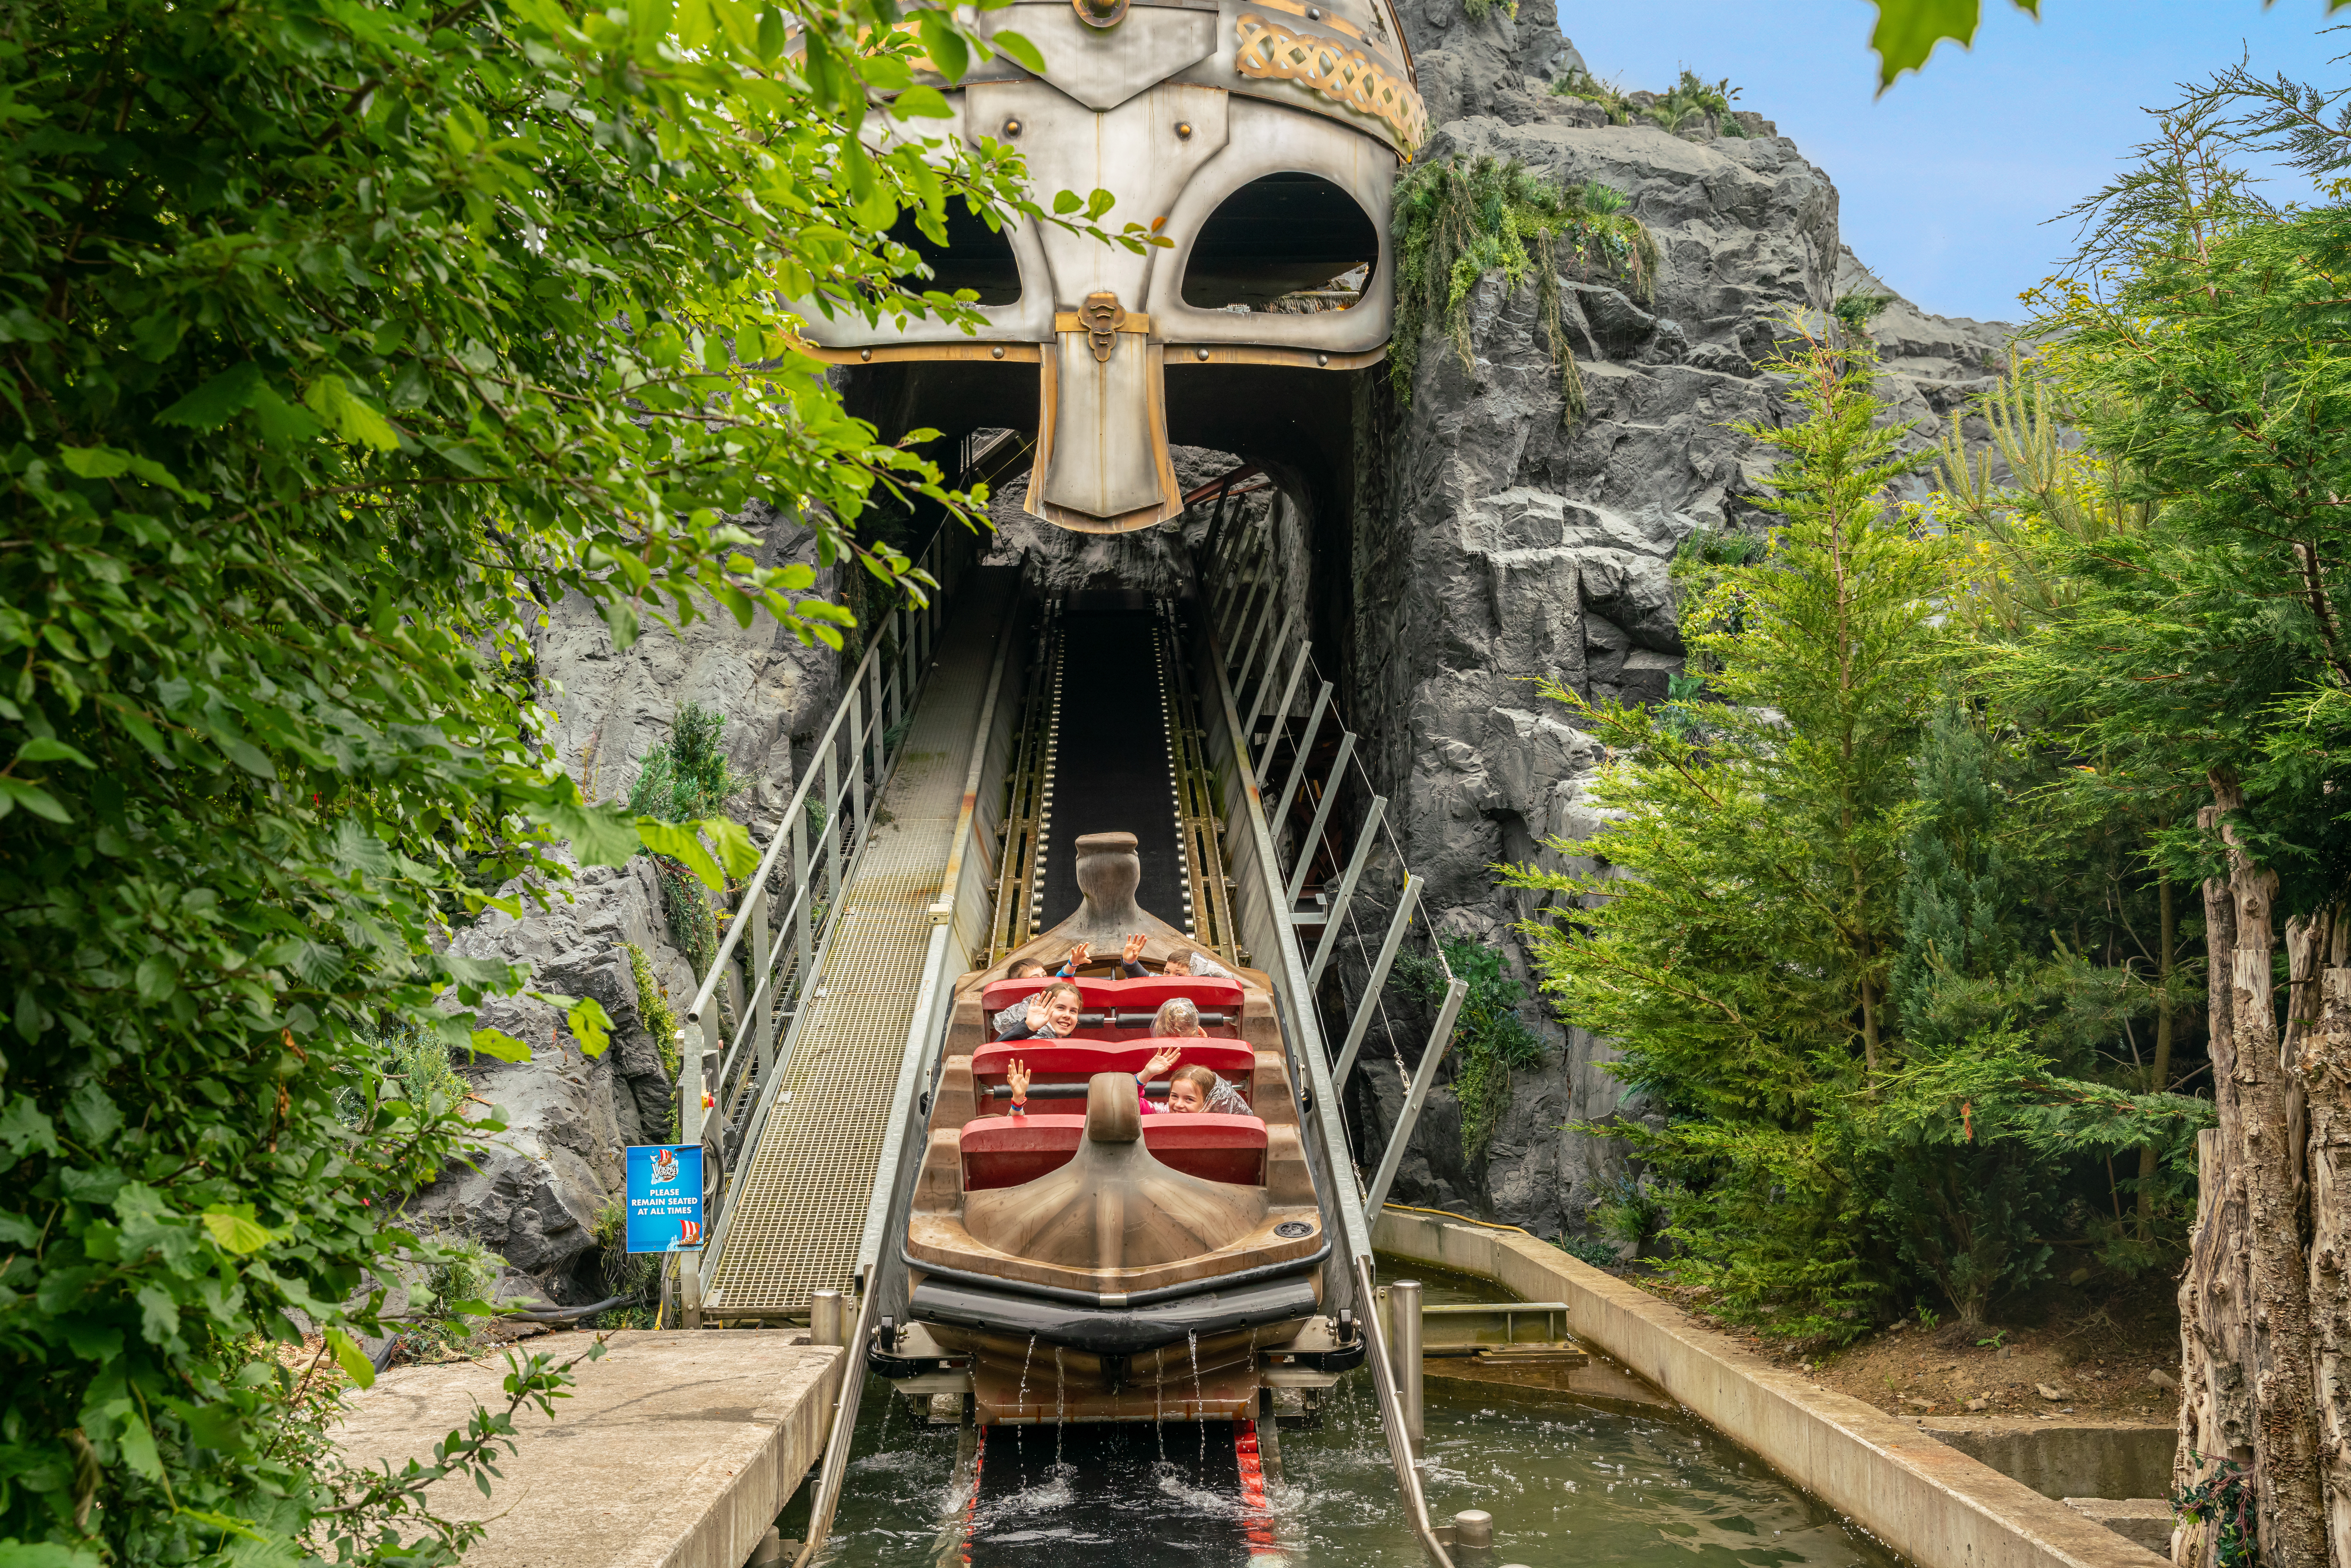 A water flume ride with a boat ascending up a ramp